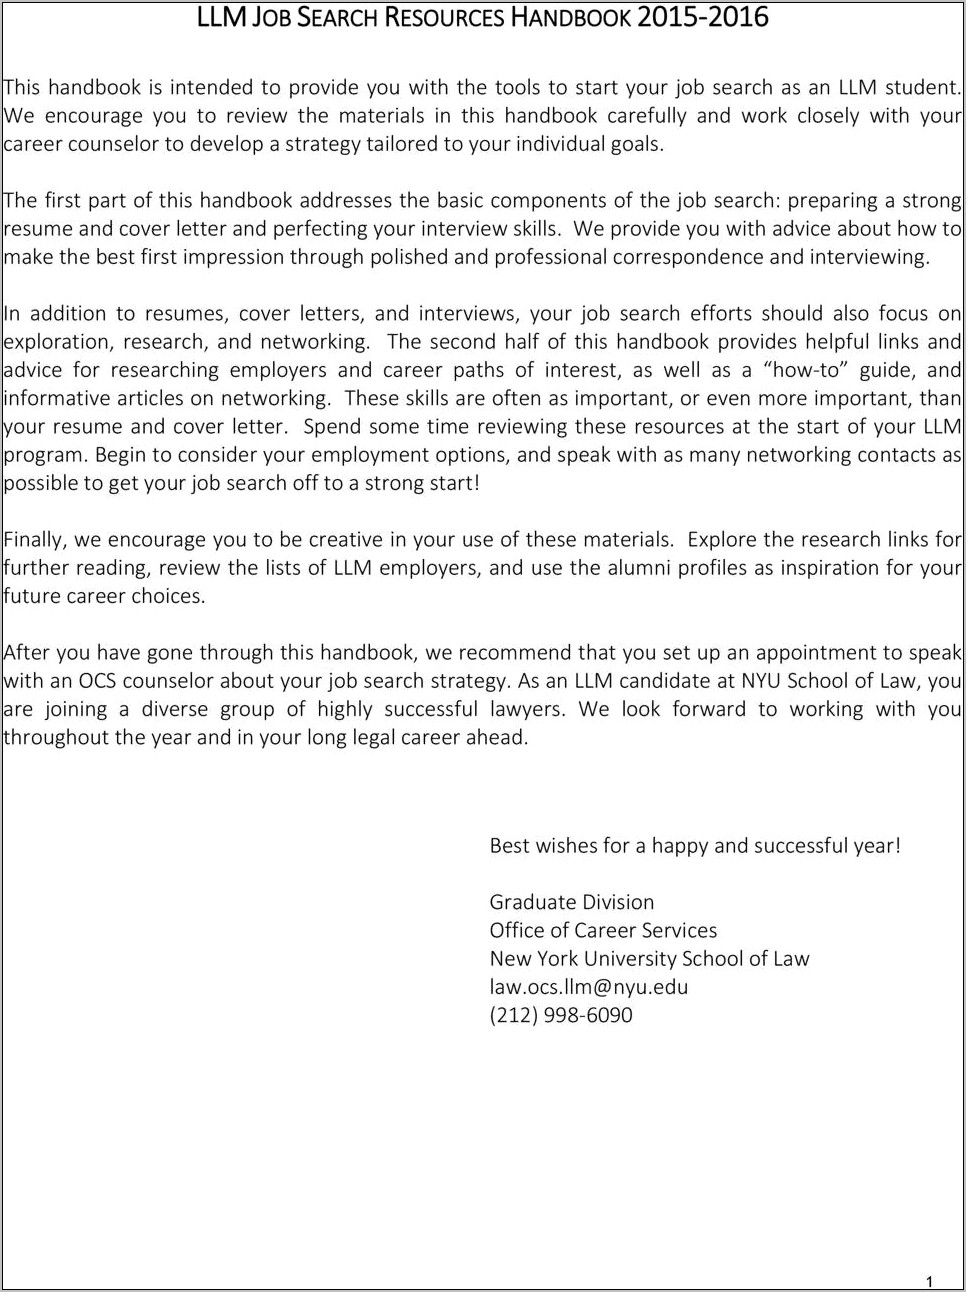 Berkeley Law Cdo Resume And Cover Letter Review